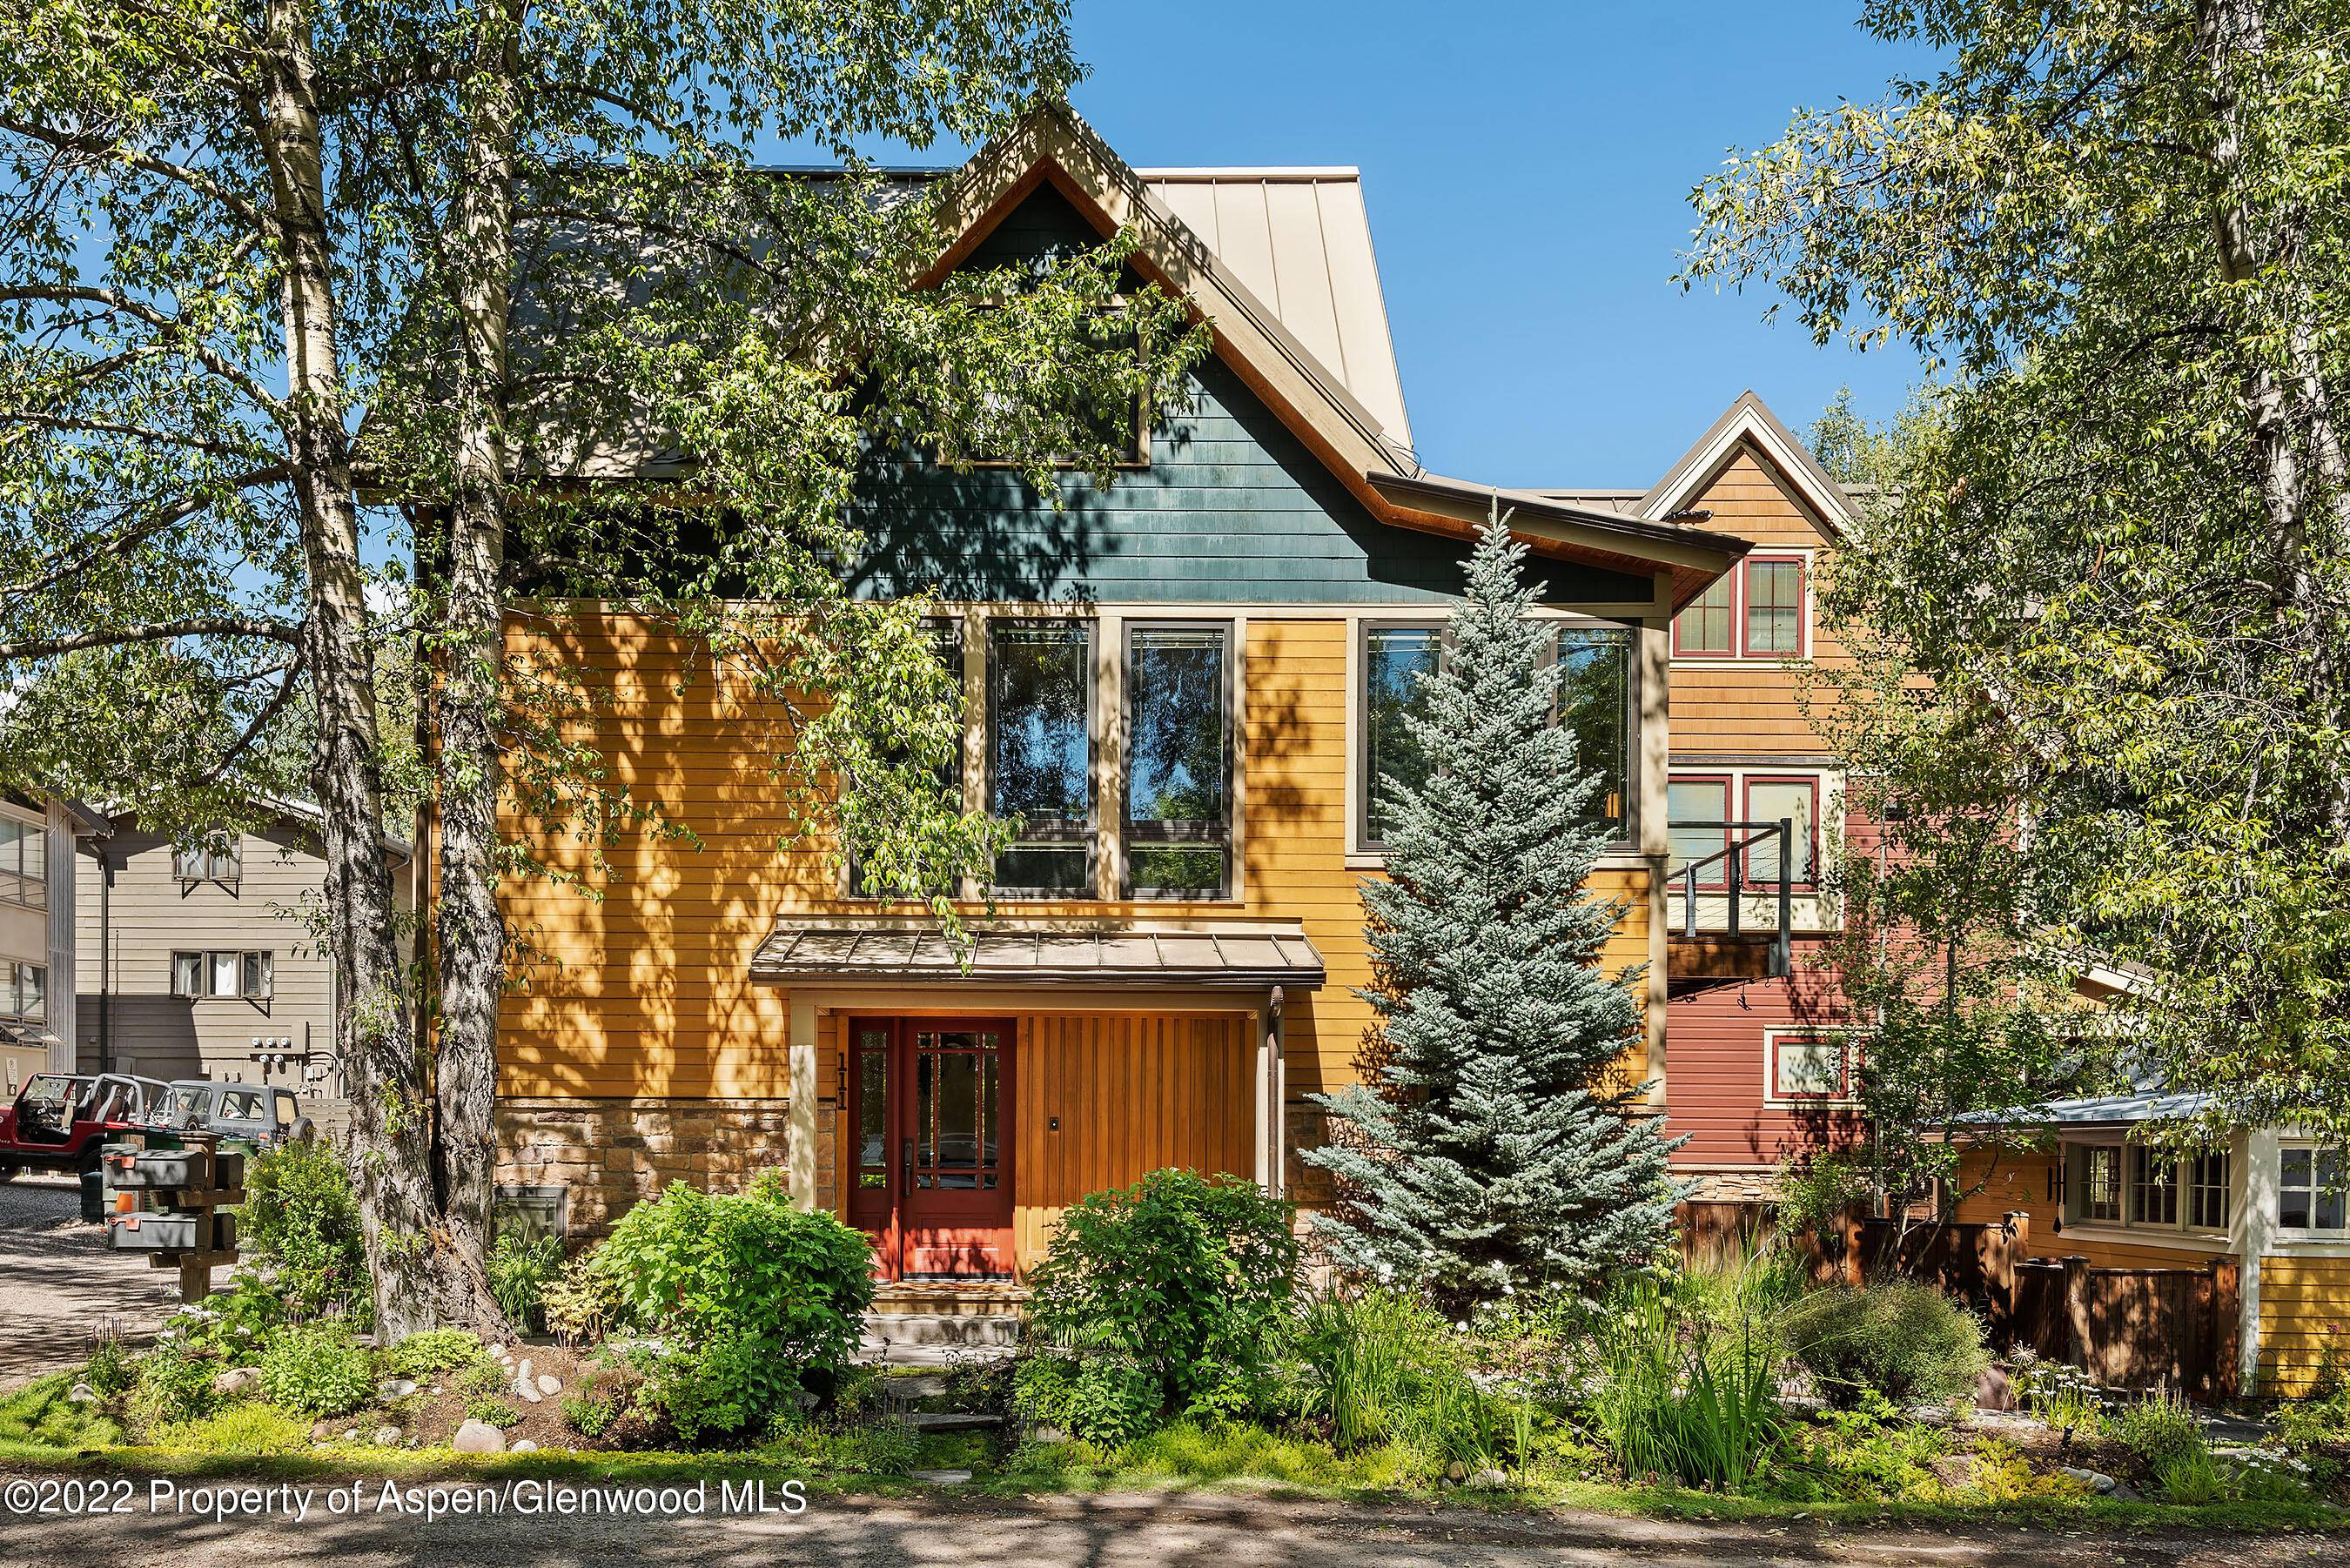 Charming three bedroom single family home in the West End with some of the most gorgeous flowers in Aspen.